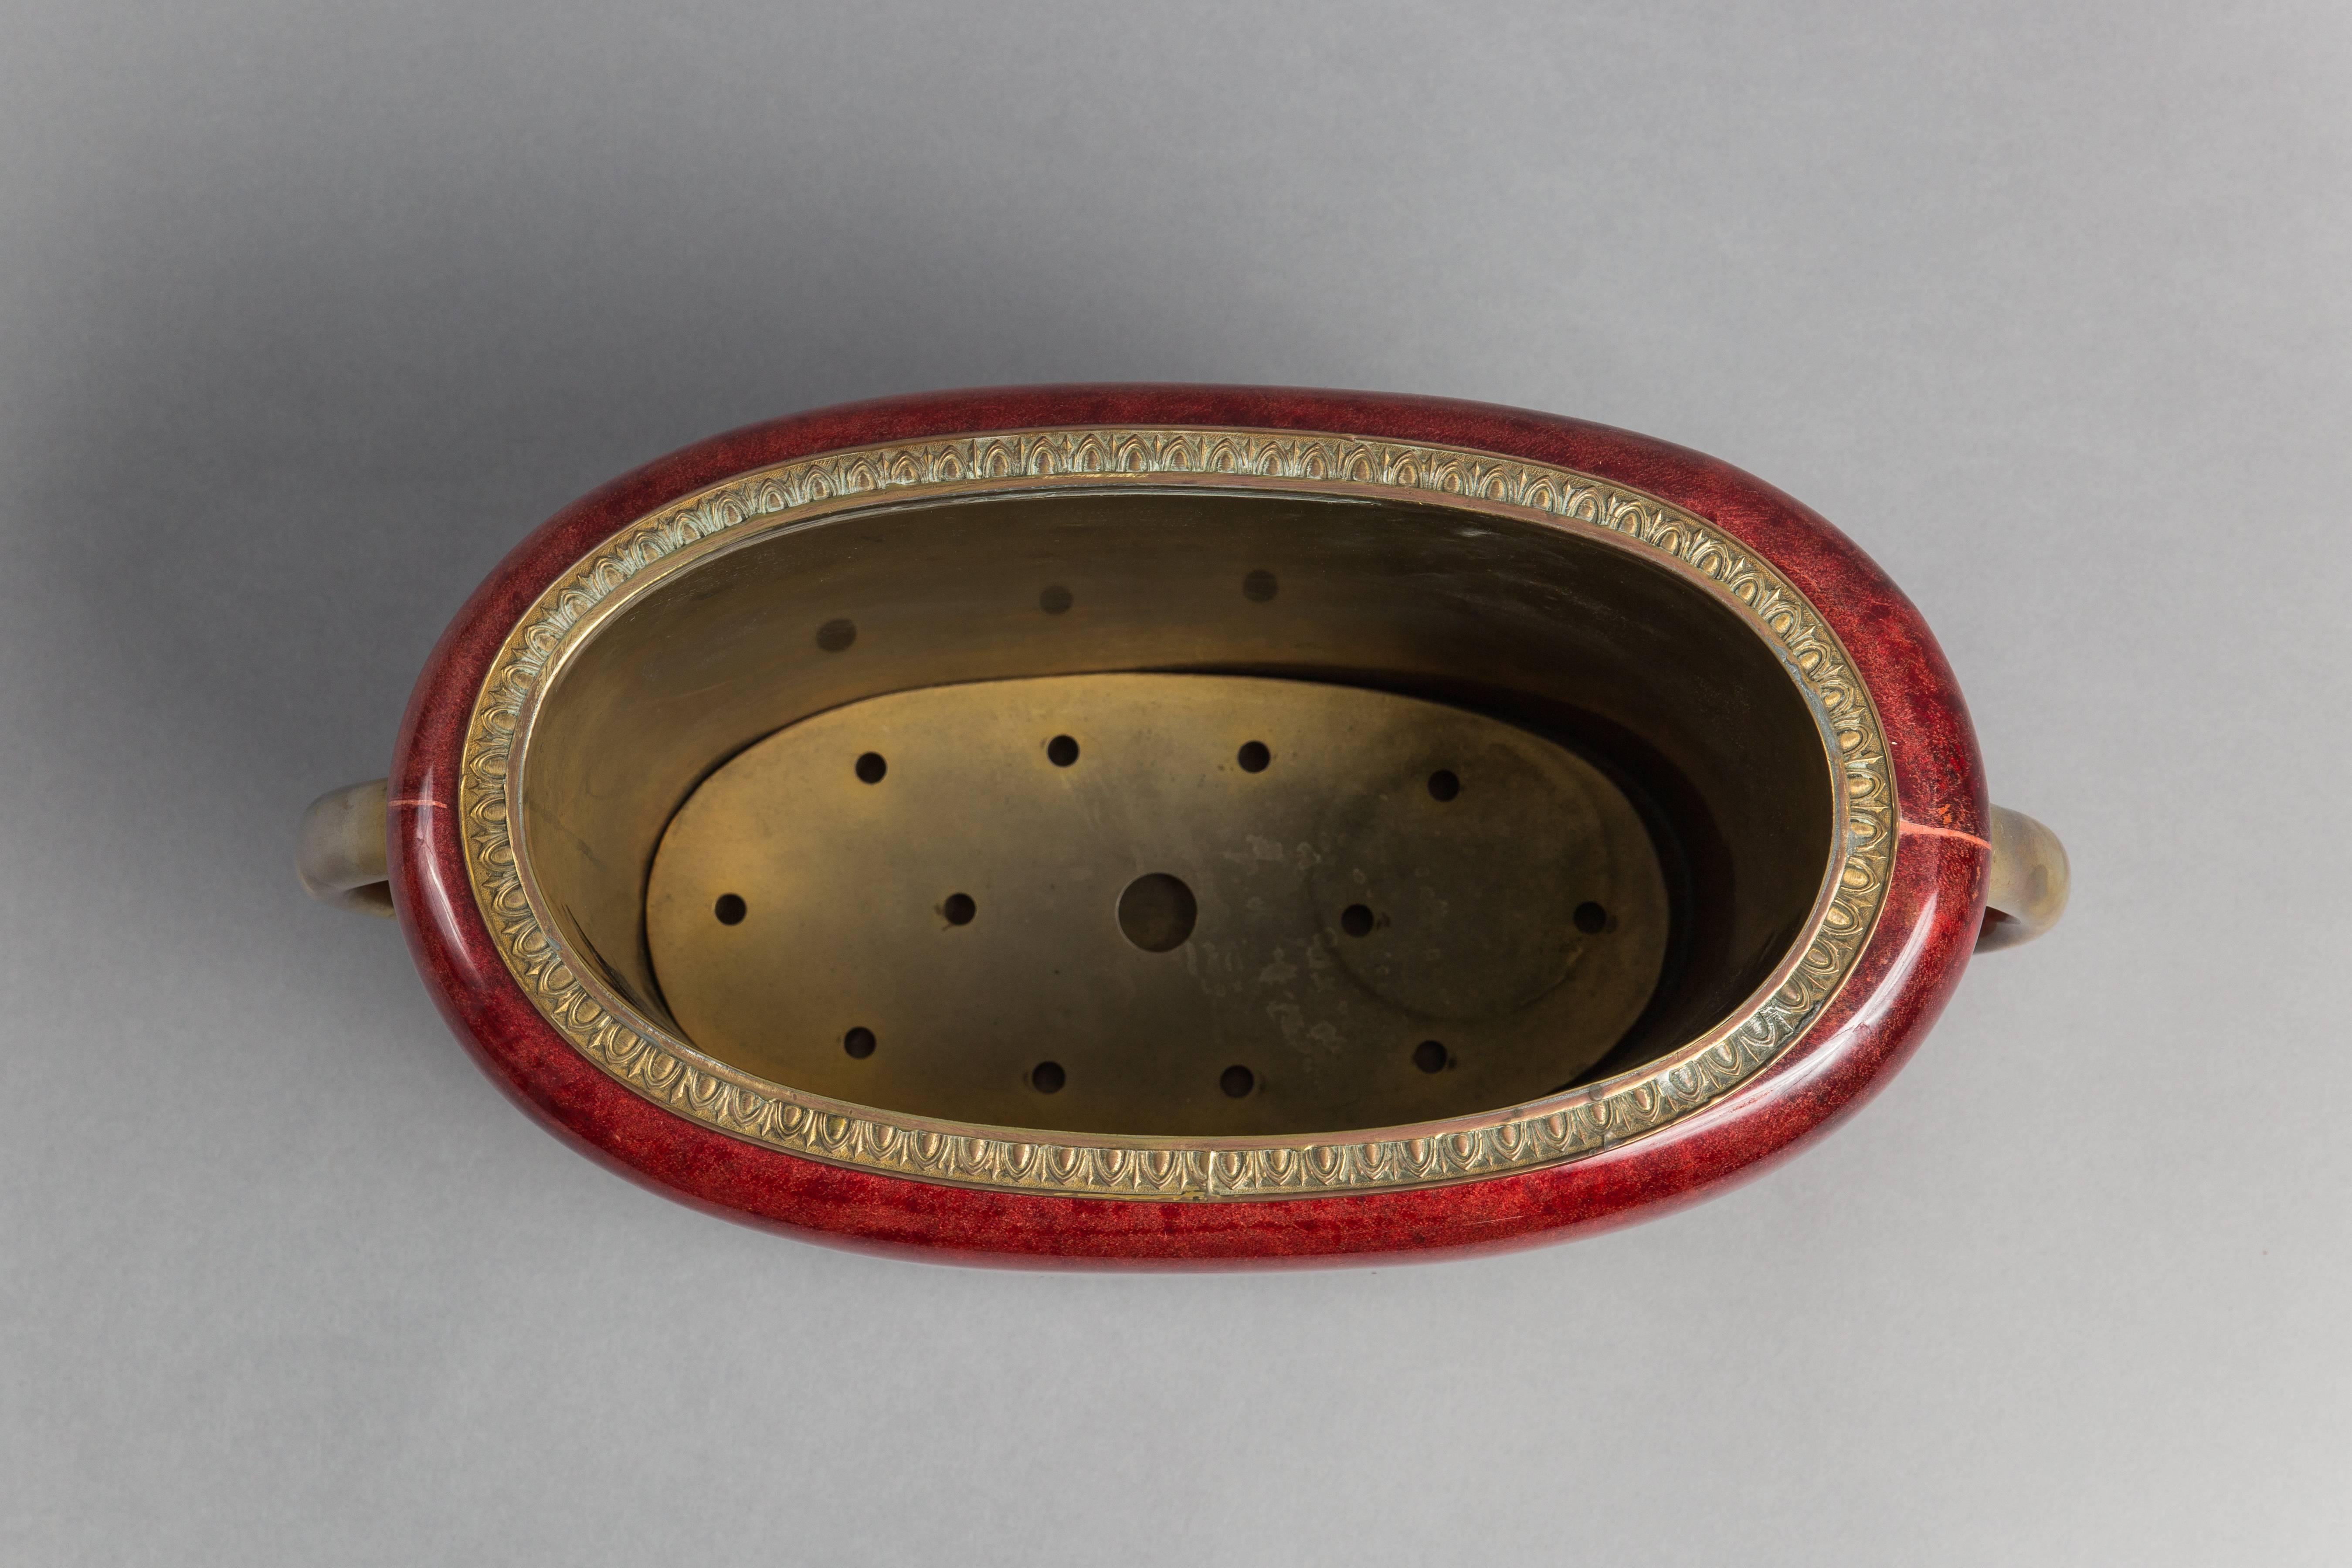 Lacquered goatskin with brass handles and interior comprised of raised pattern design on rim and including removable rack on the bottom. Original manufacturer’s label to underside.

This item can be viewed at 1stdibs Gallery at the New York Design